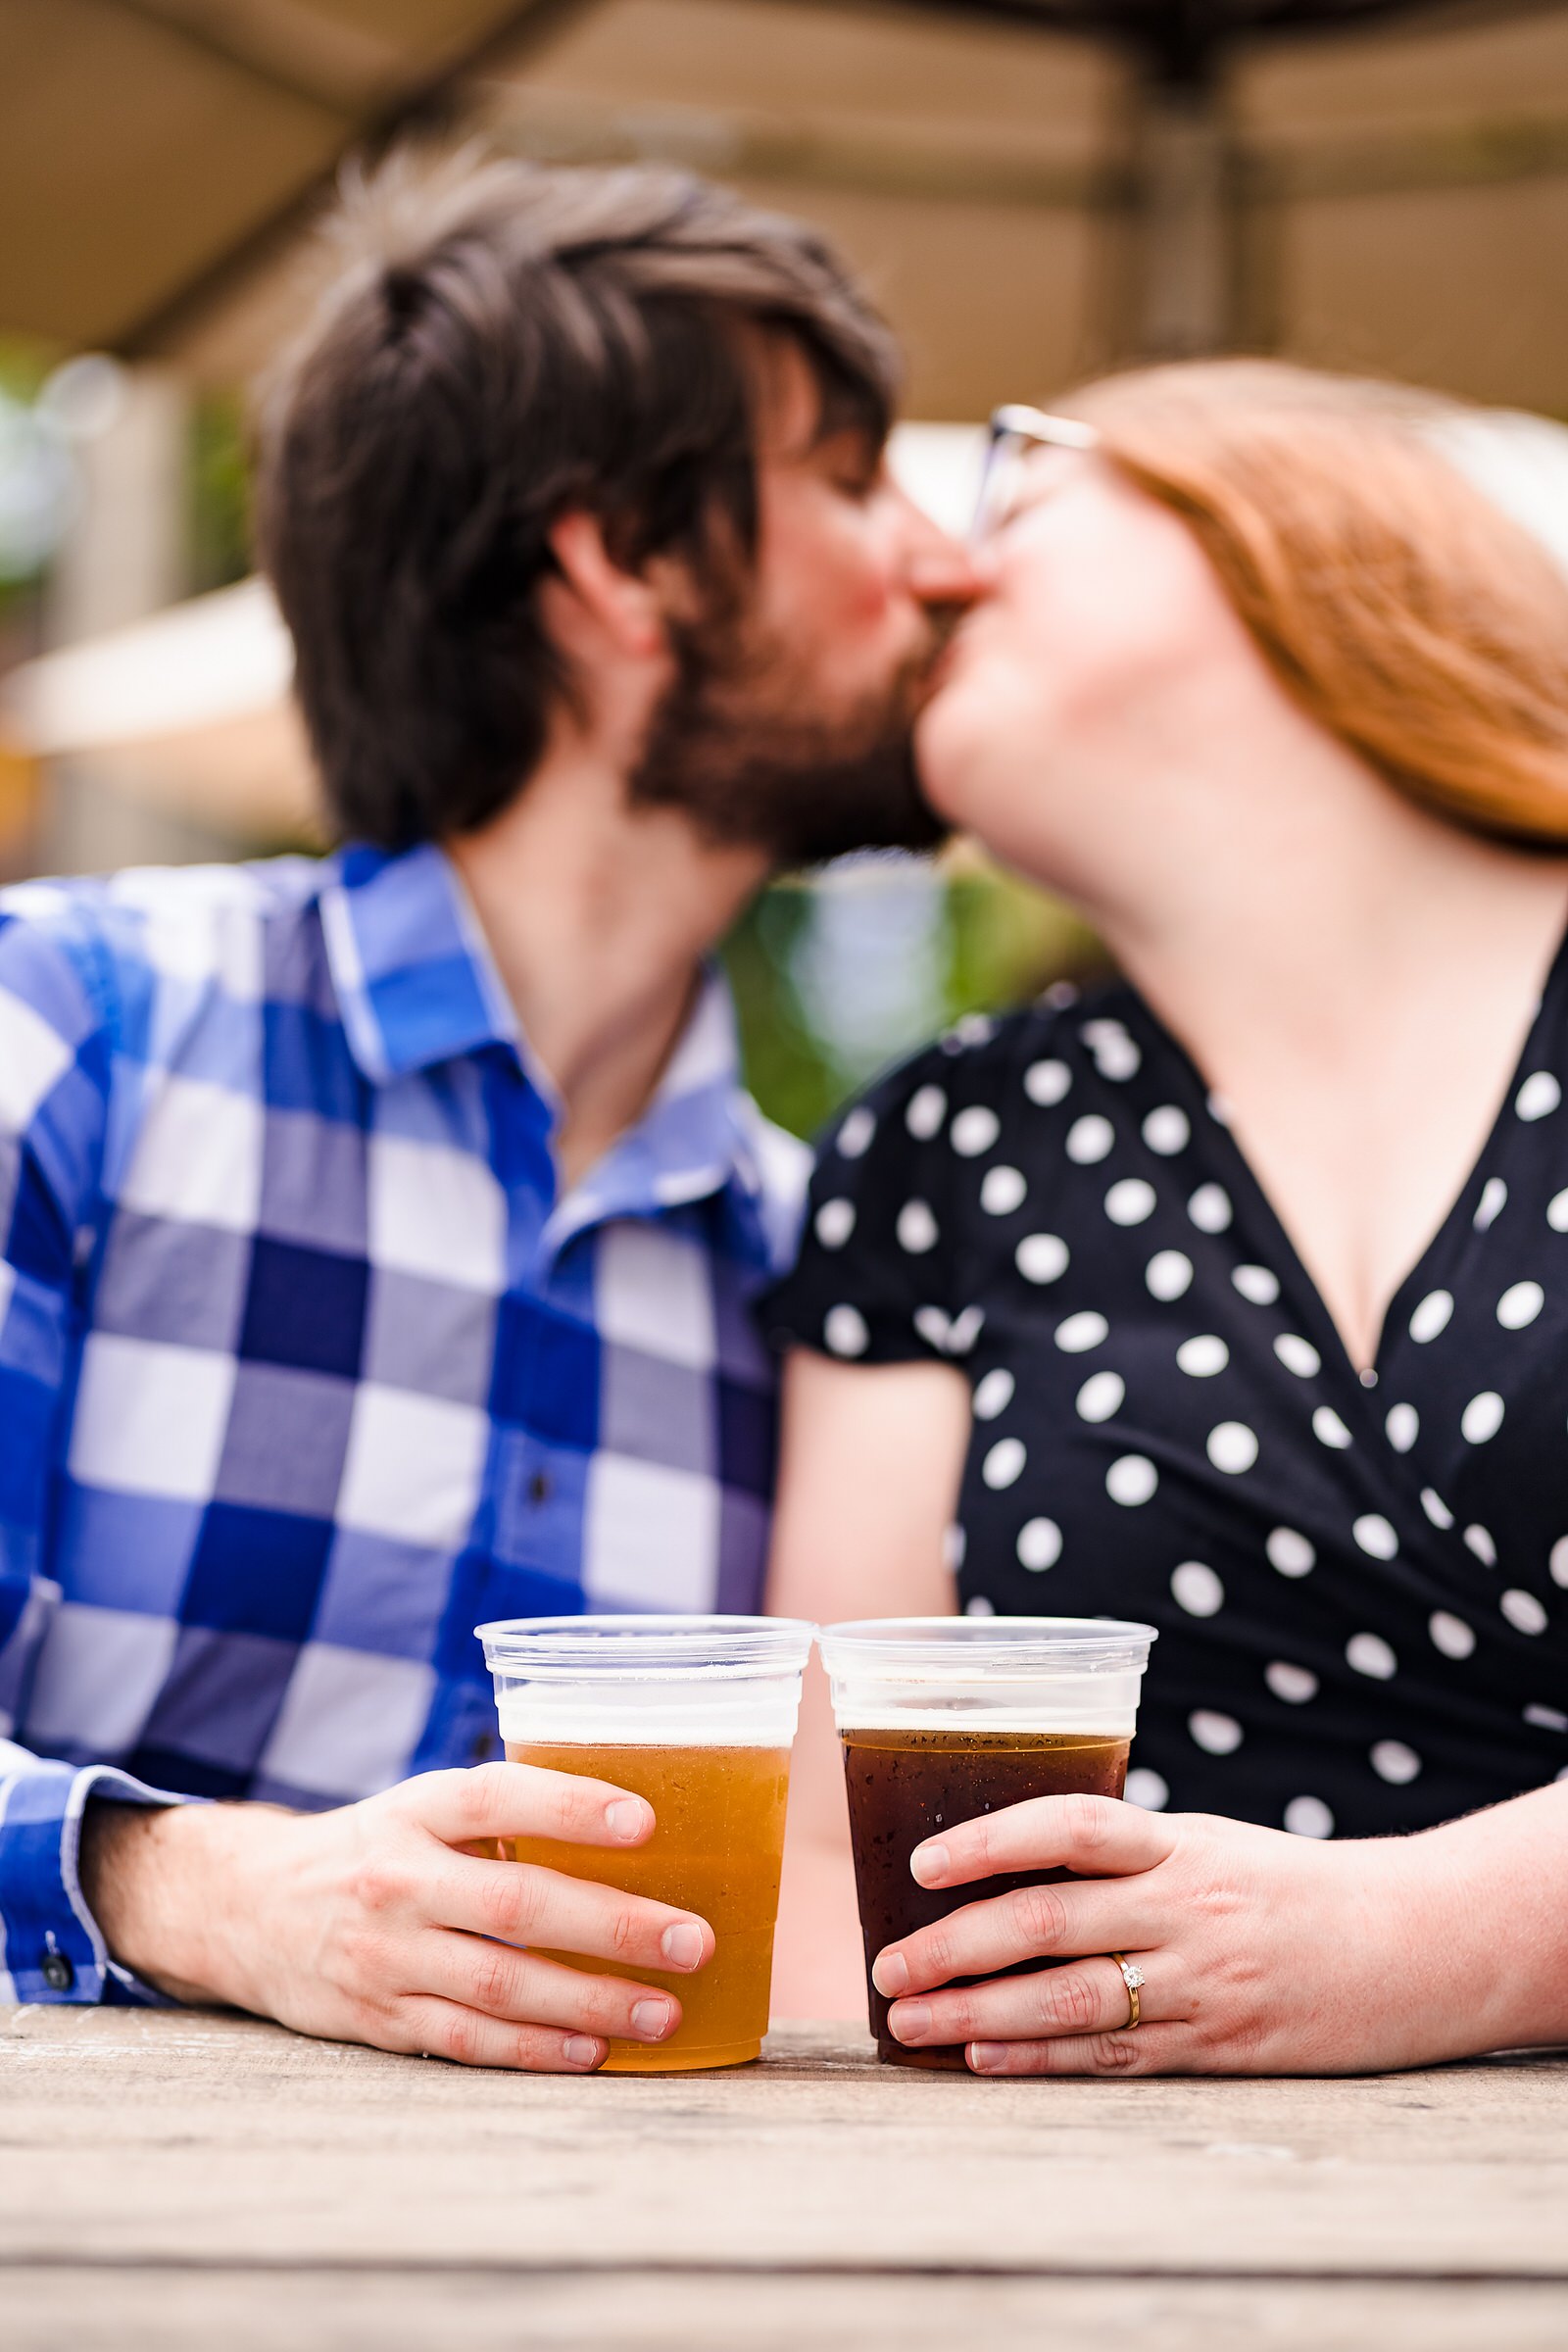 An engaged couple kisses while holding beers at Durham brewery Ponysaurus for their engagement photos